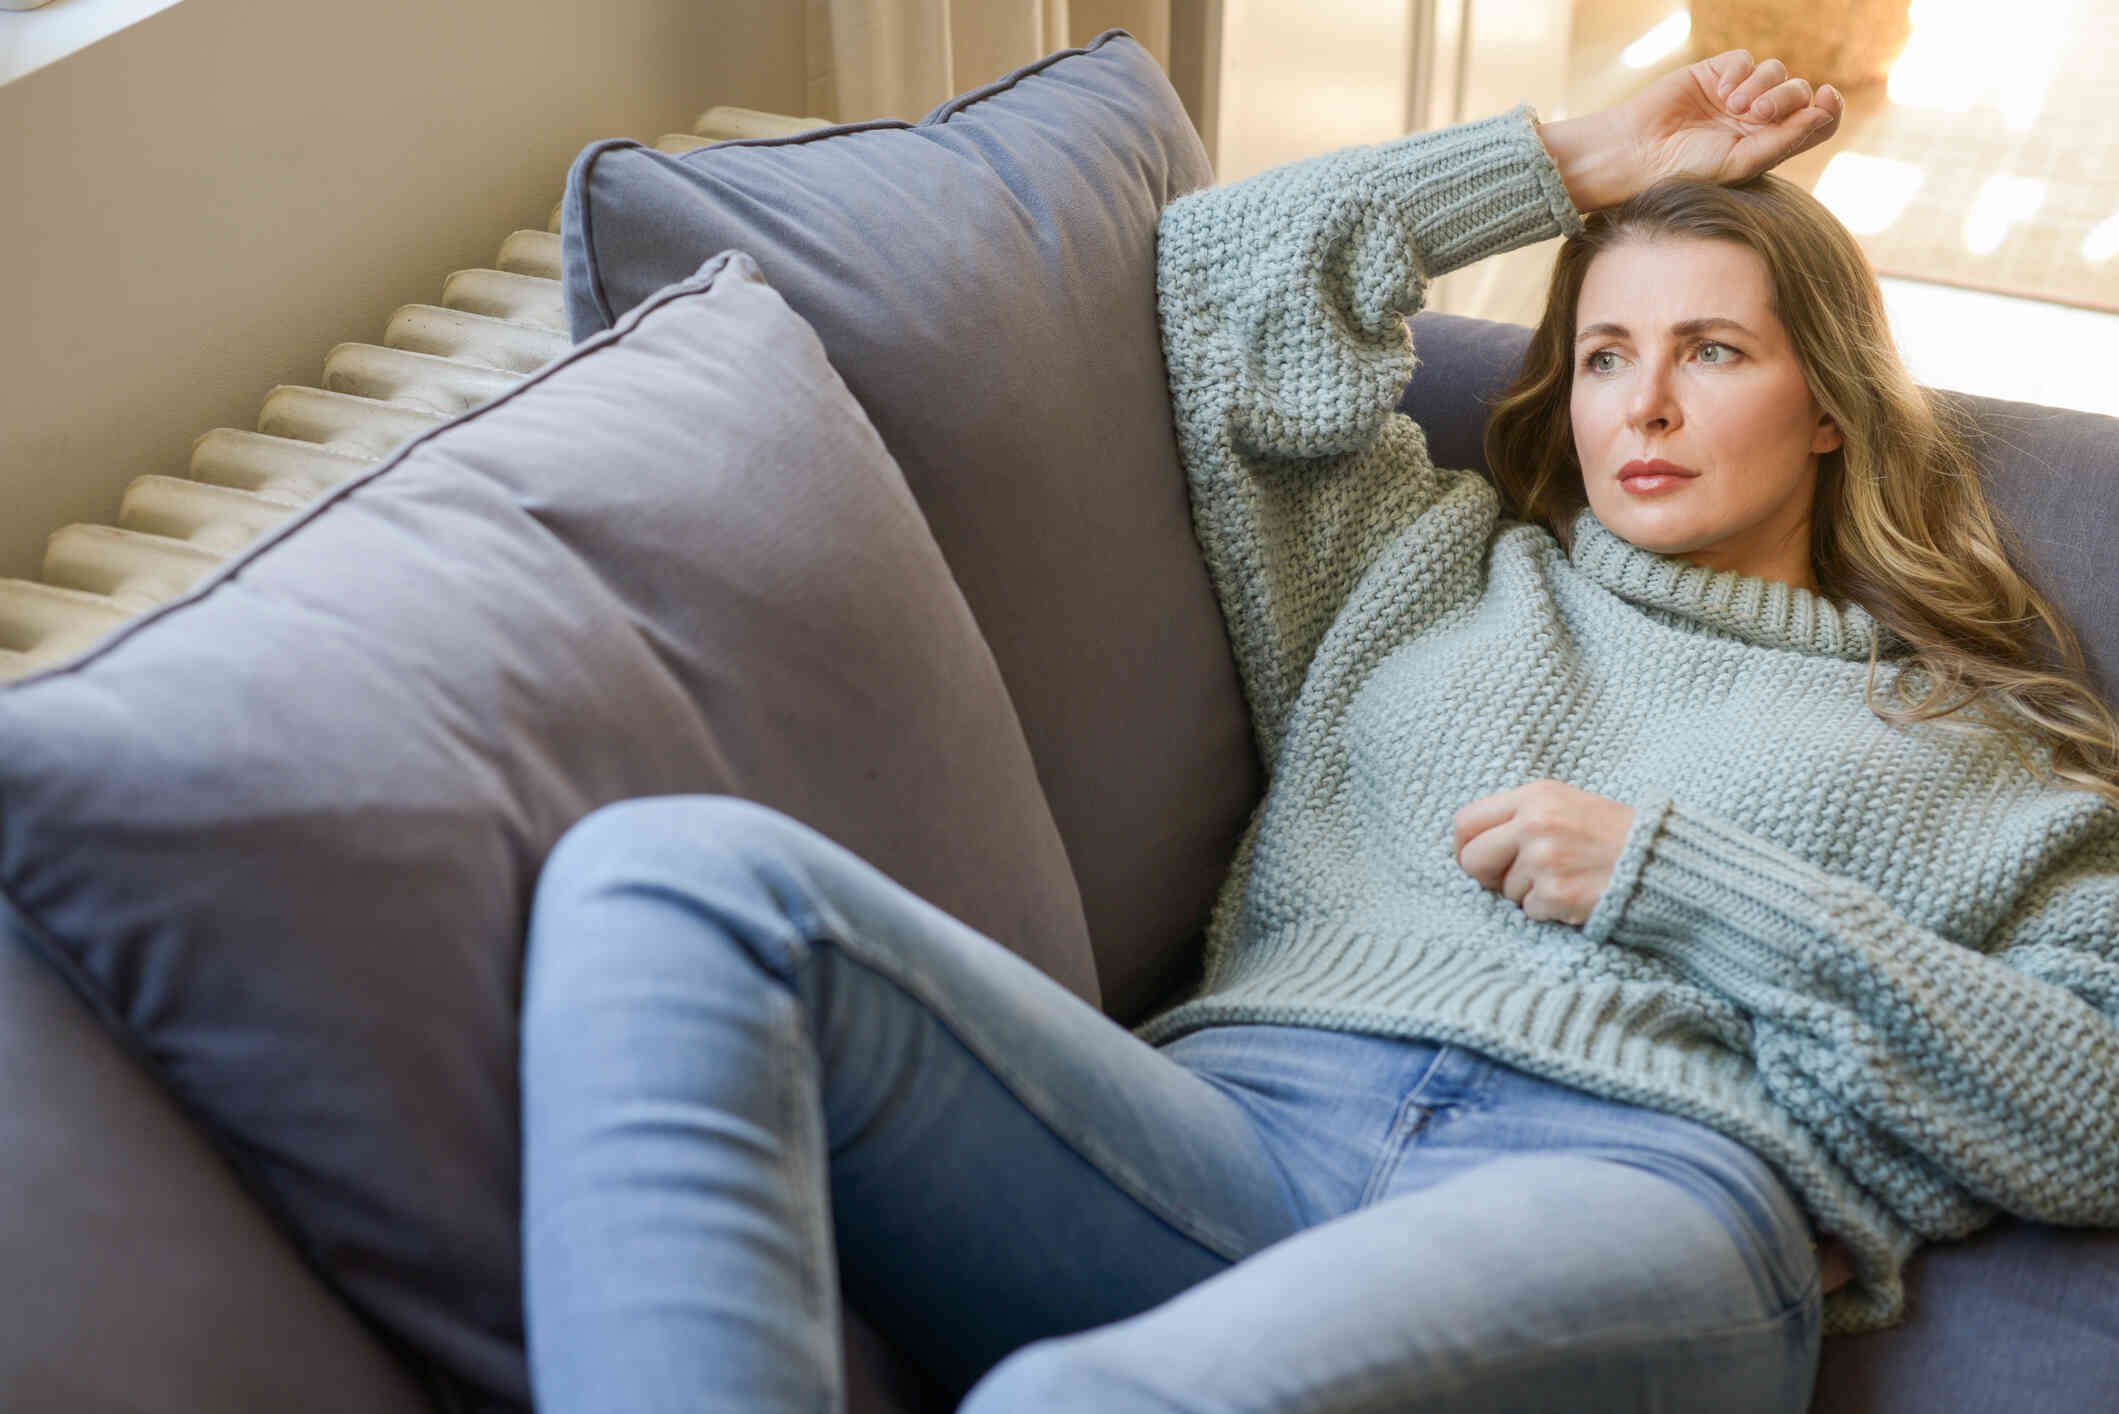 A woman in a green sweater lays on her back on the couch with her arm rested across her forehead while she gazes off with a sad expression.